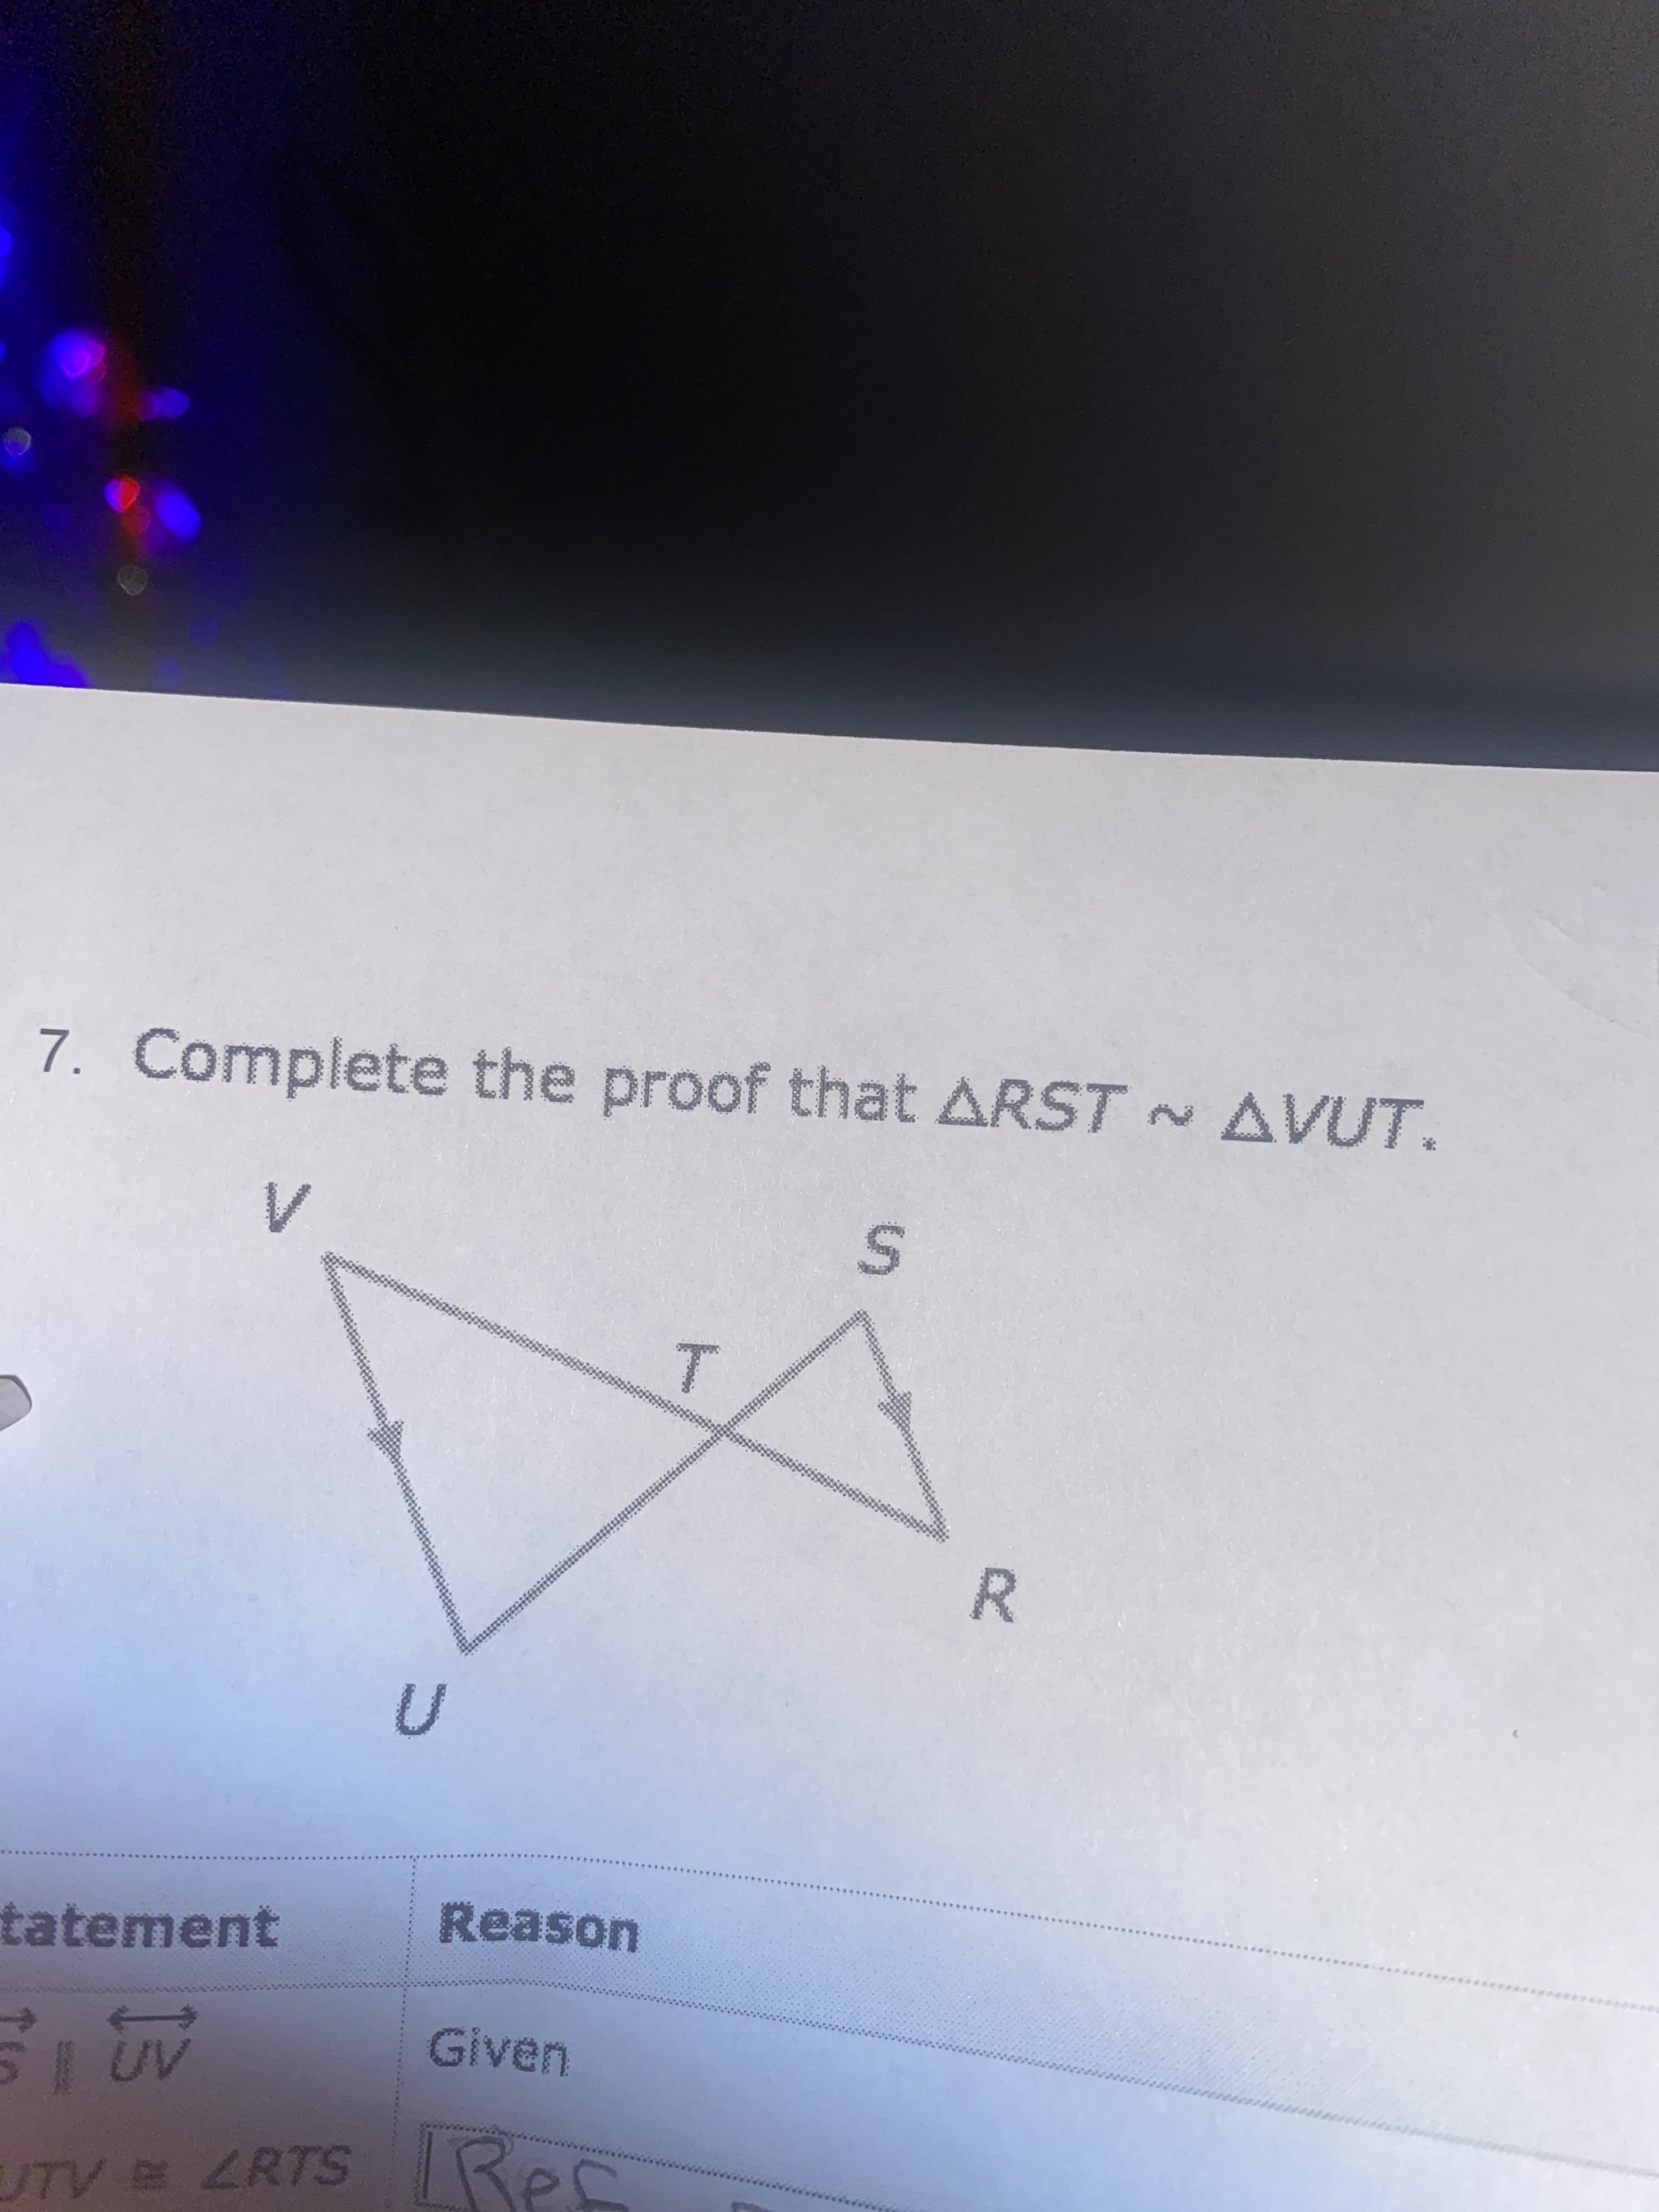 R.
S.
T.
7. Complete the proof that ARST AVUT.
tatement
Given
UTV LRTS Rec
